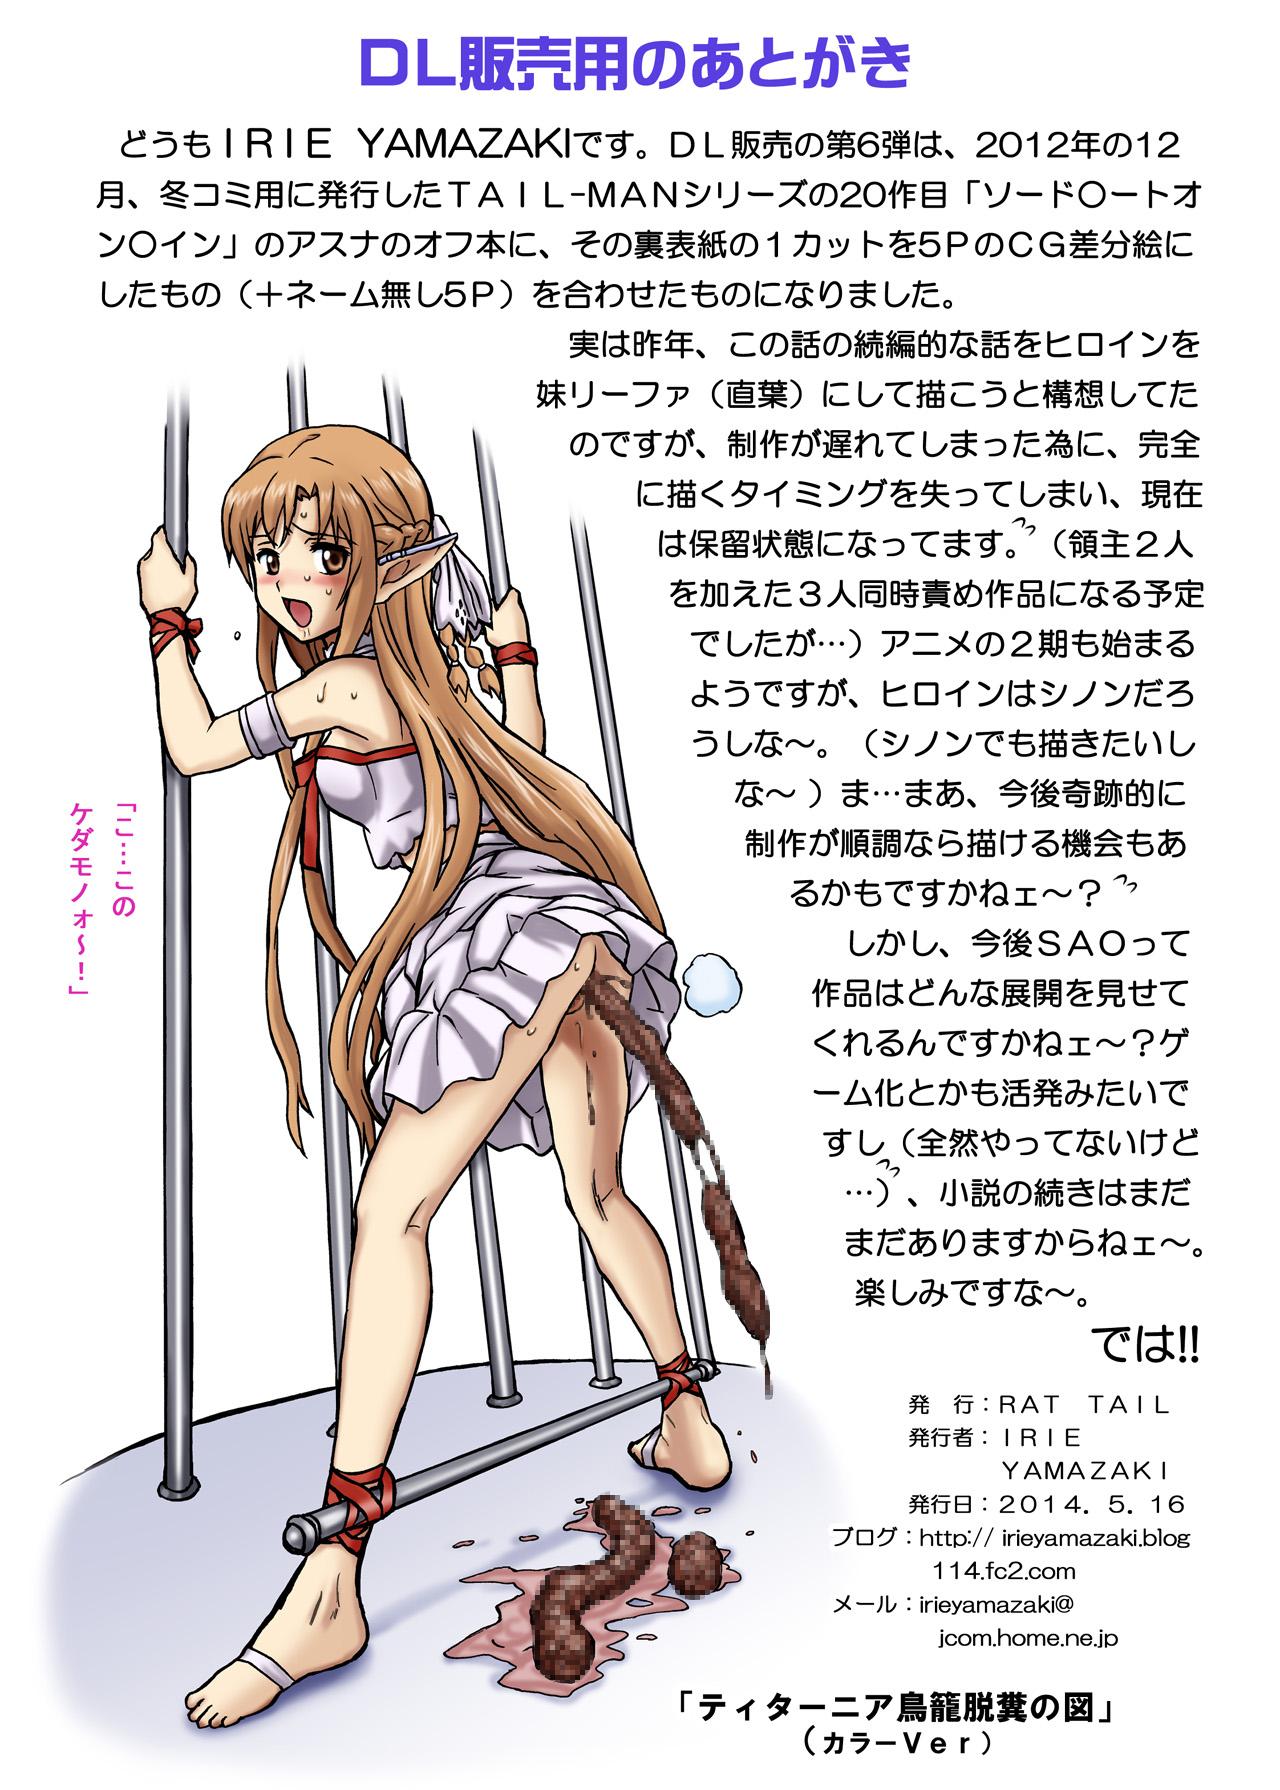 Shaved Pussy TAIL-MAN ASUNA BOOK - Sword art online Hiddencam - Page 45